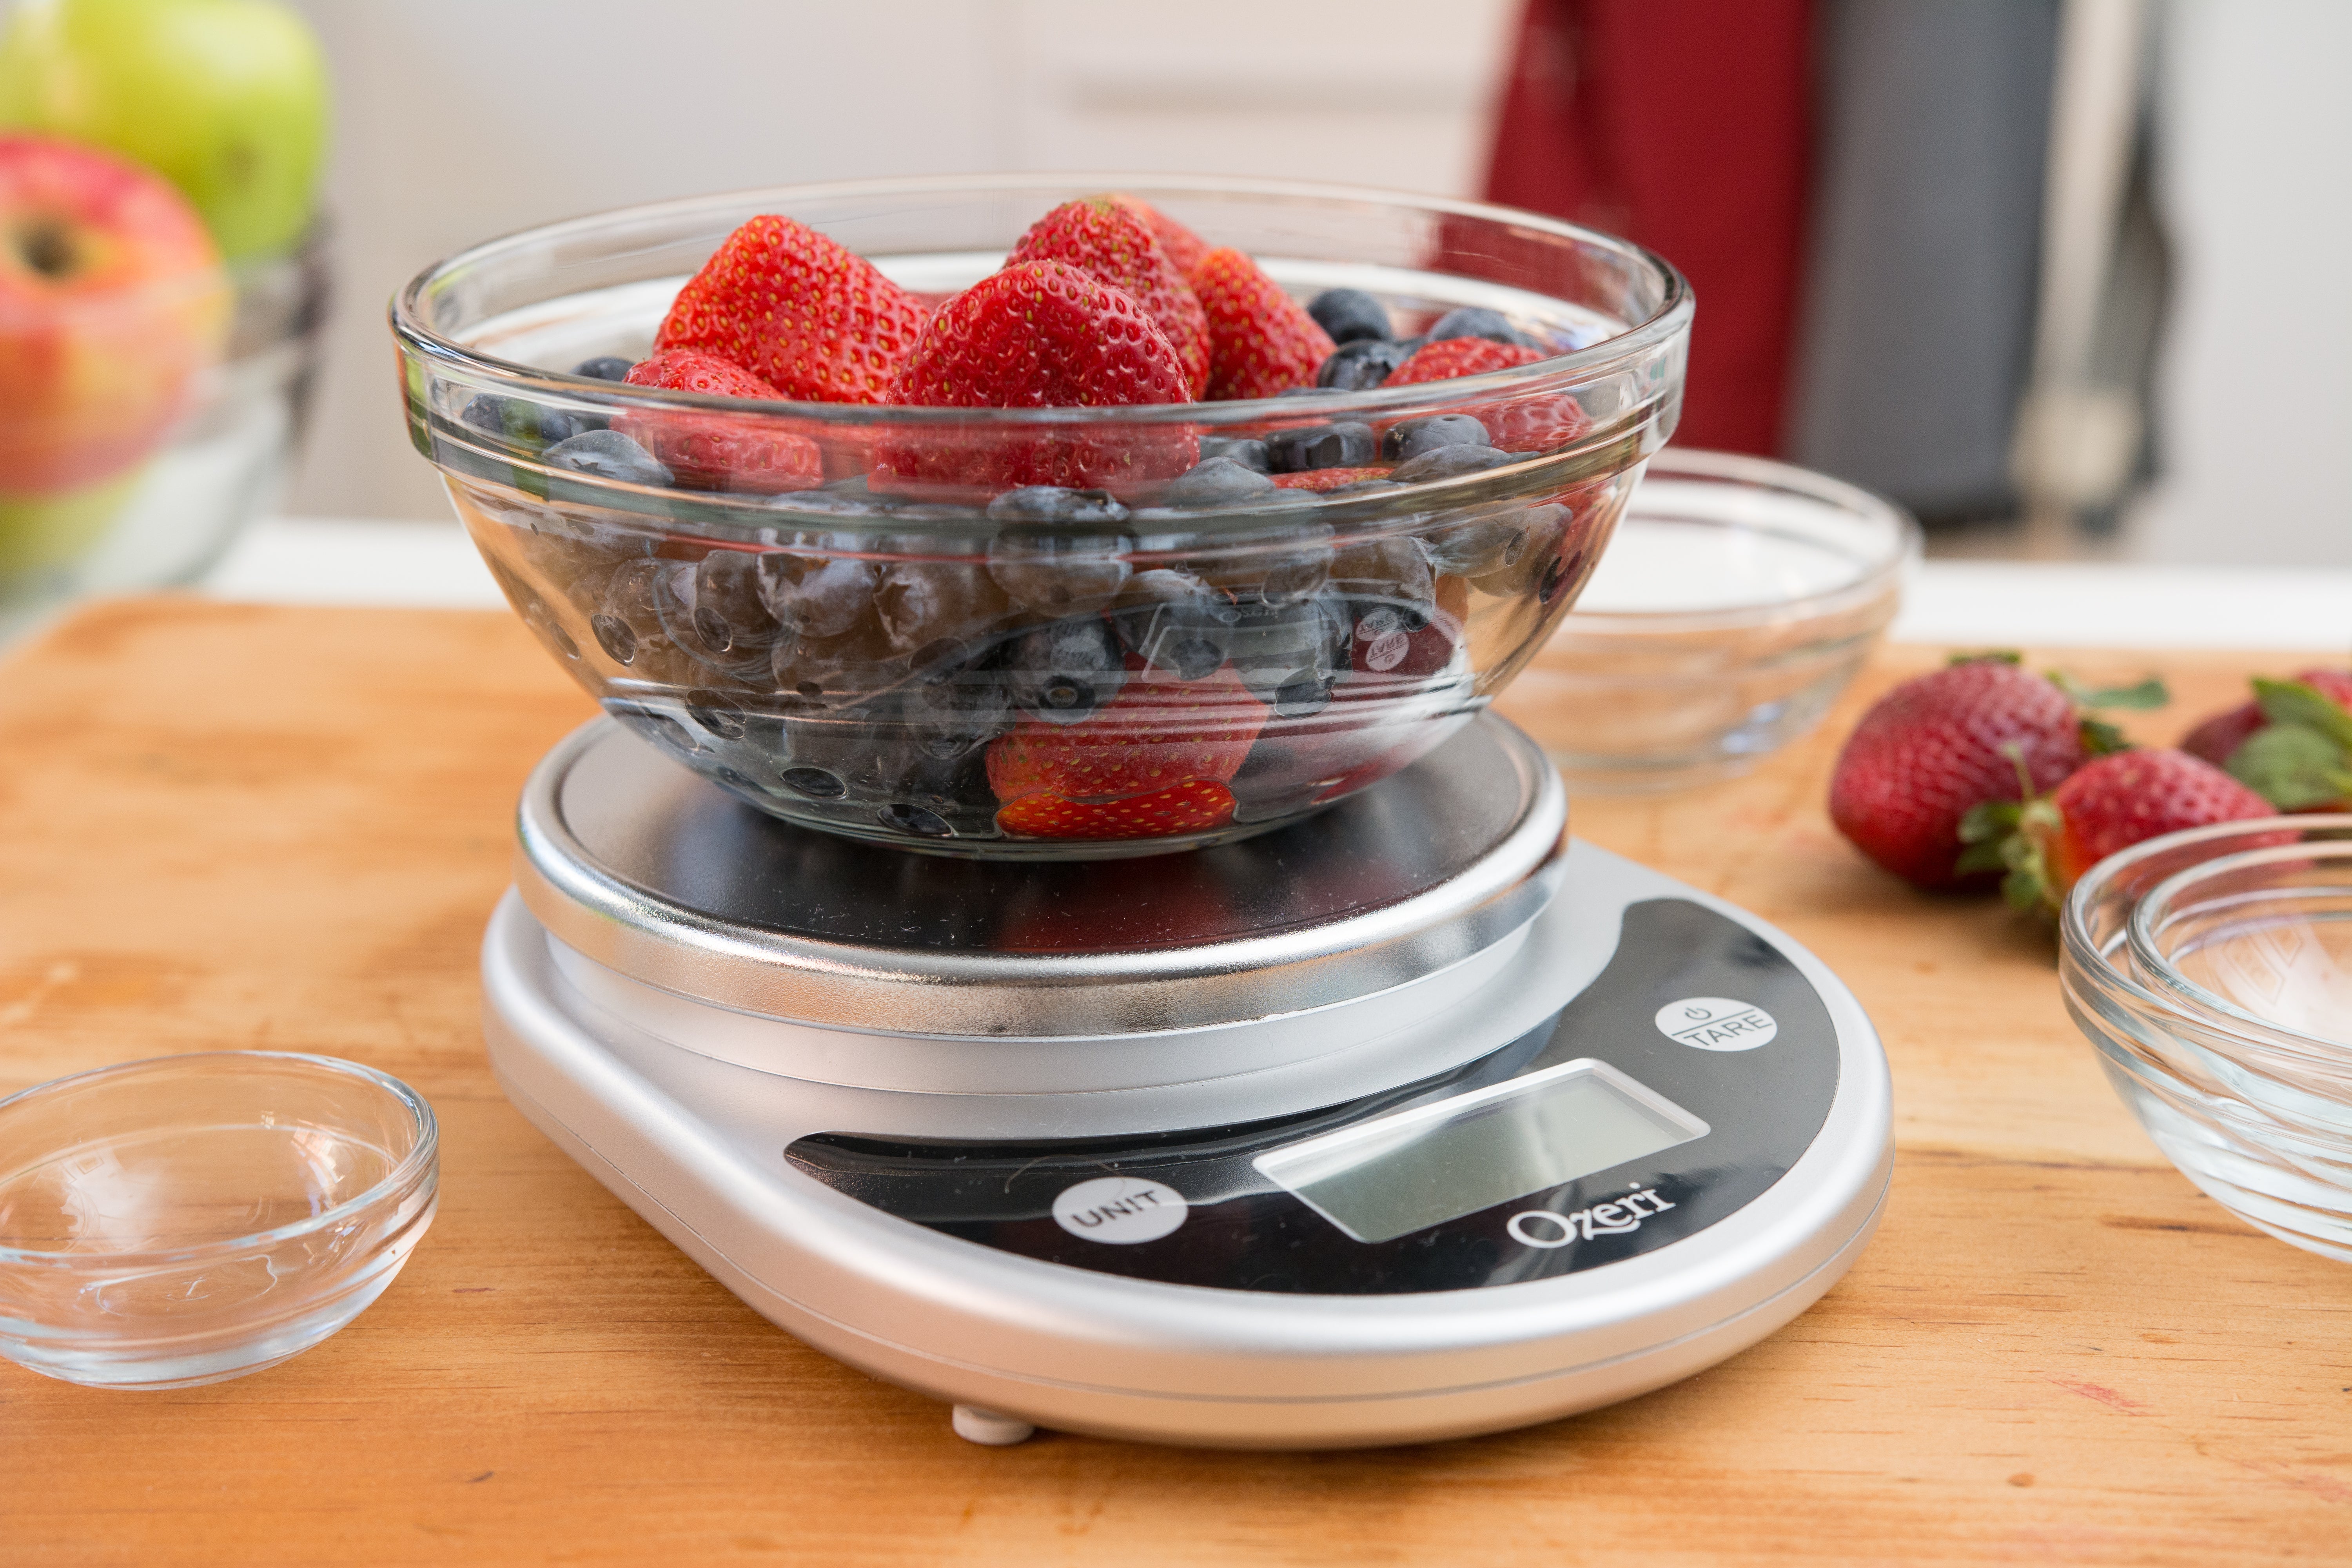 Bowl of fruit on the kitchen scale.